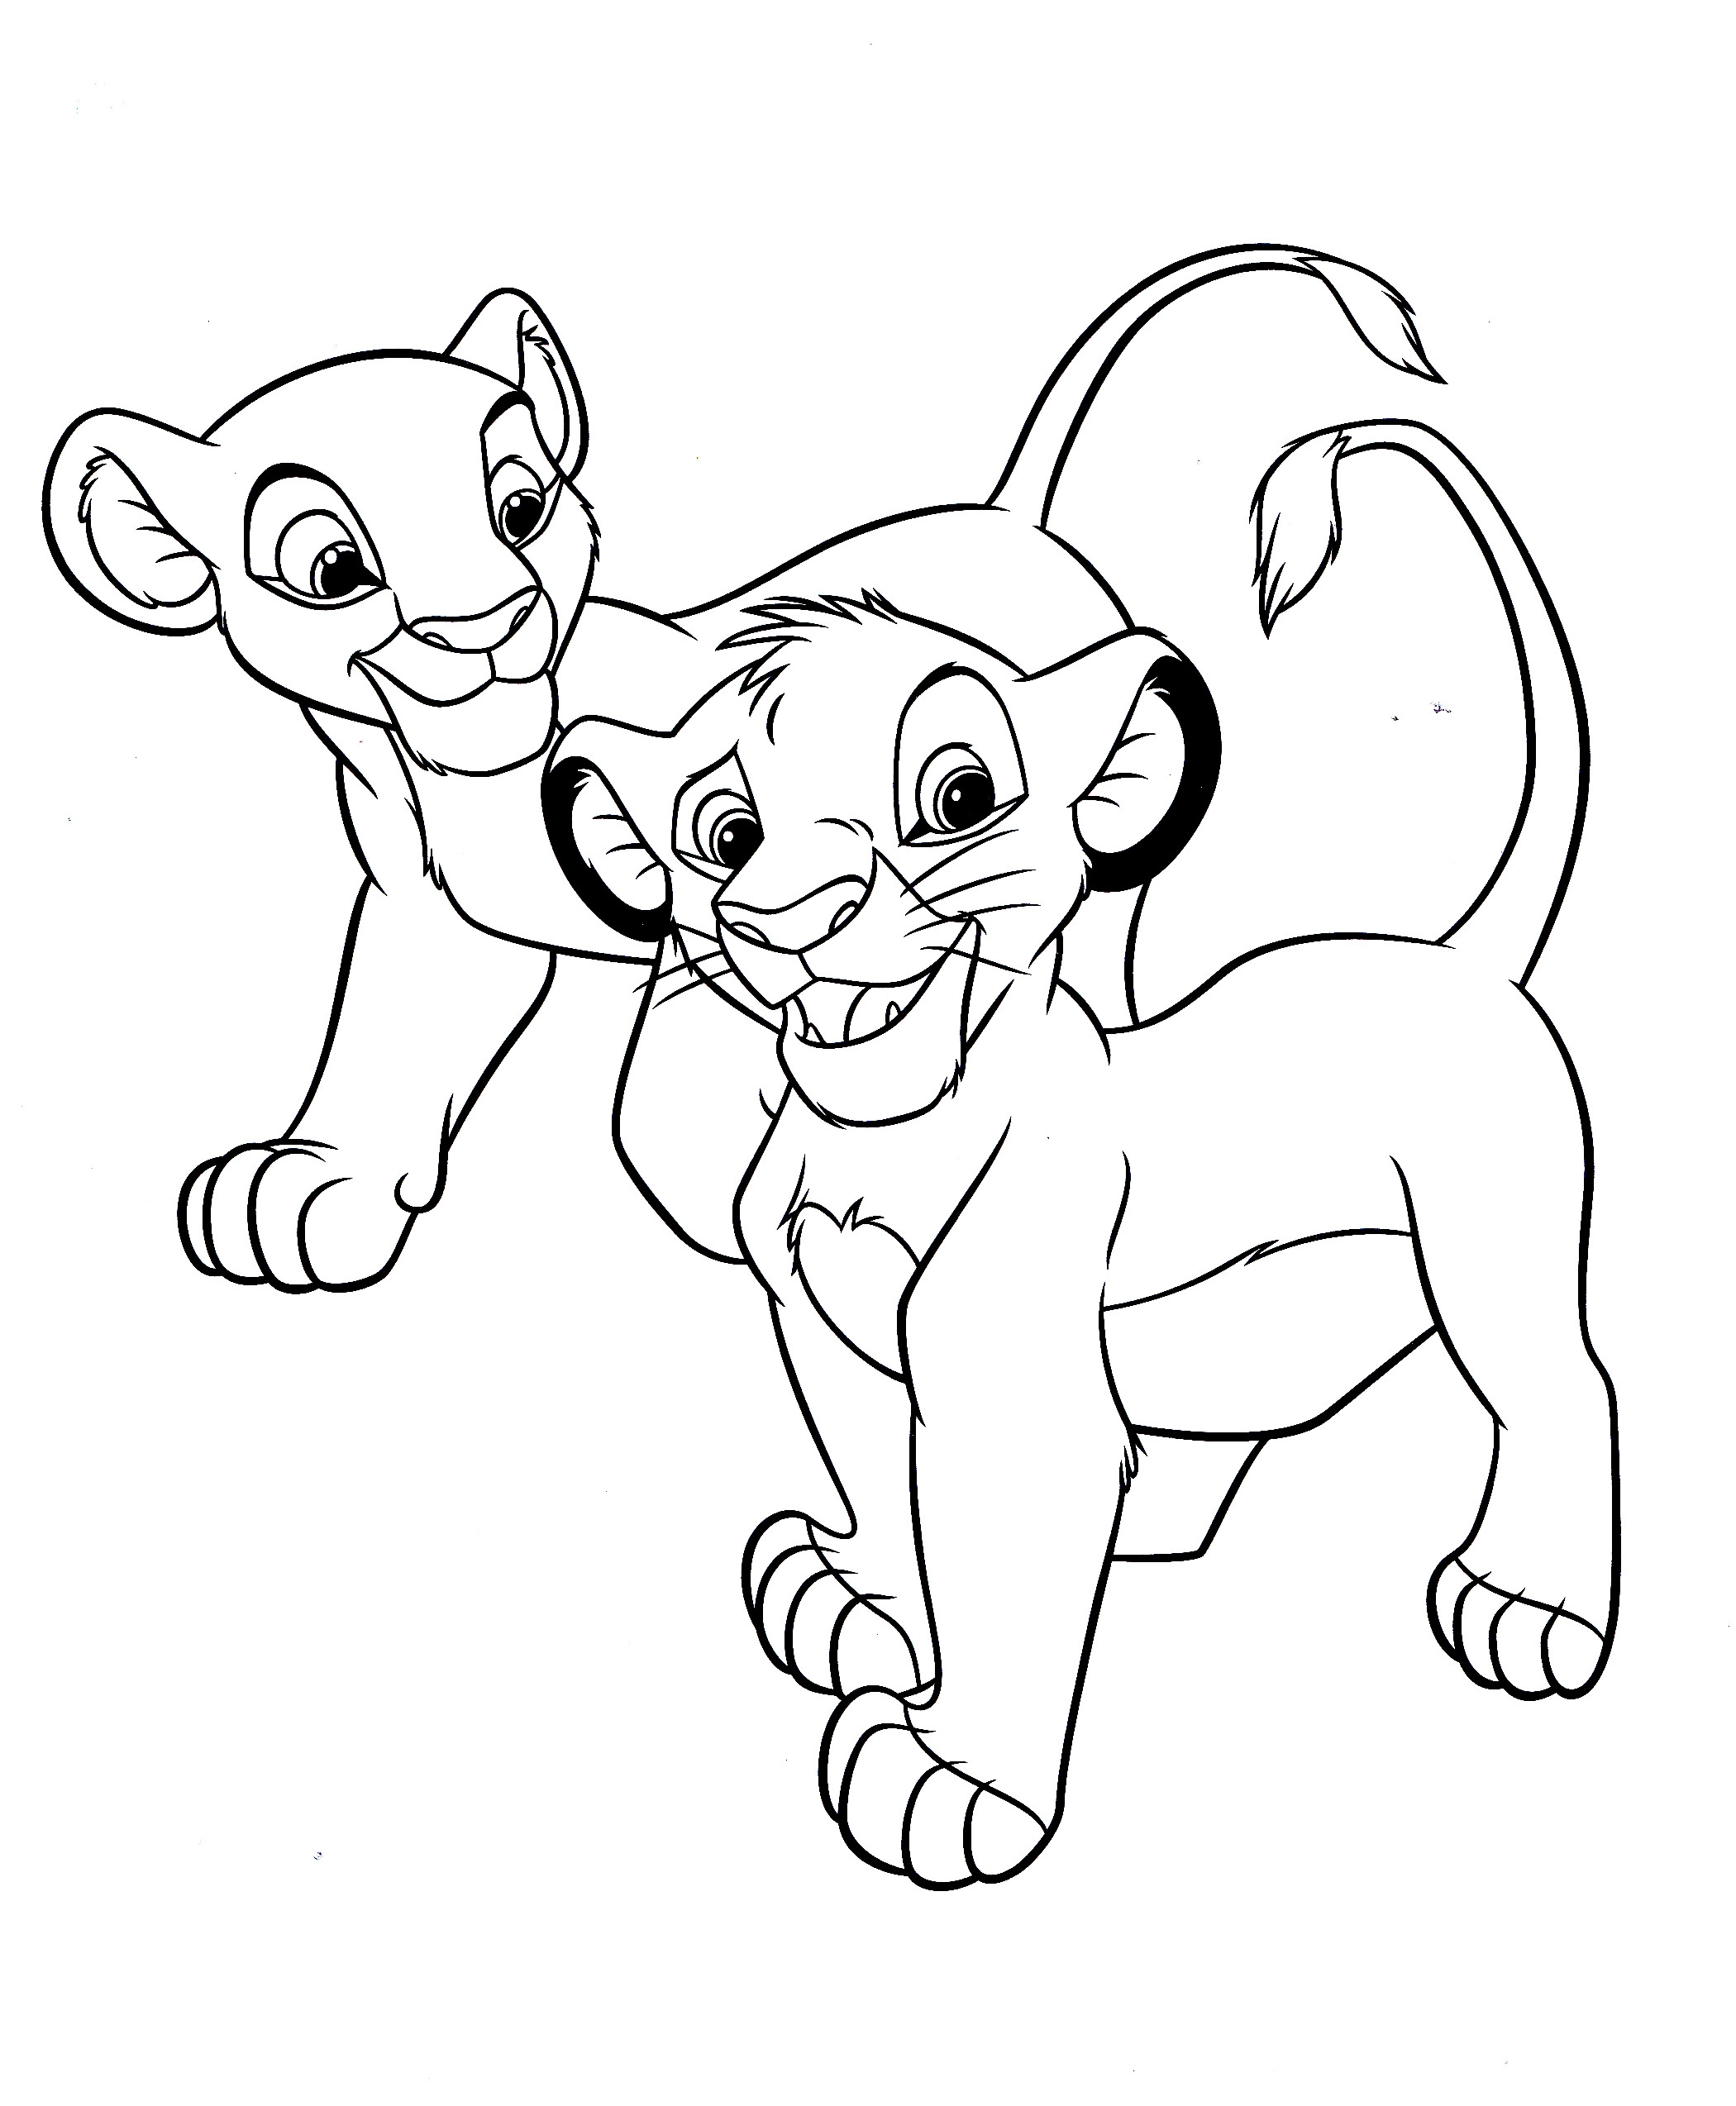 Lion King Coloring Pages Nala_ at GetColorings.com | Free ...